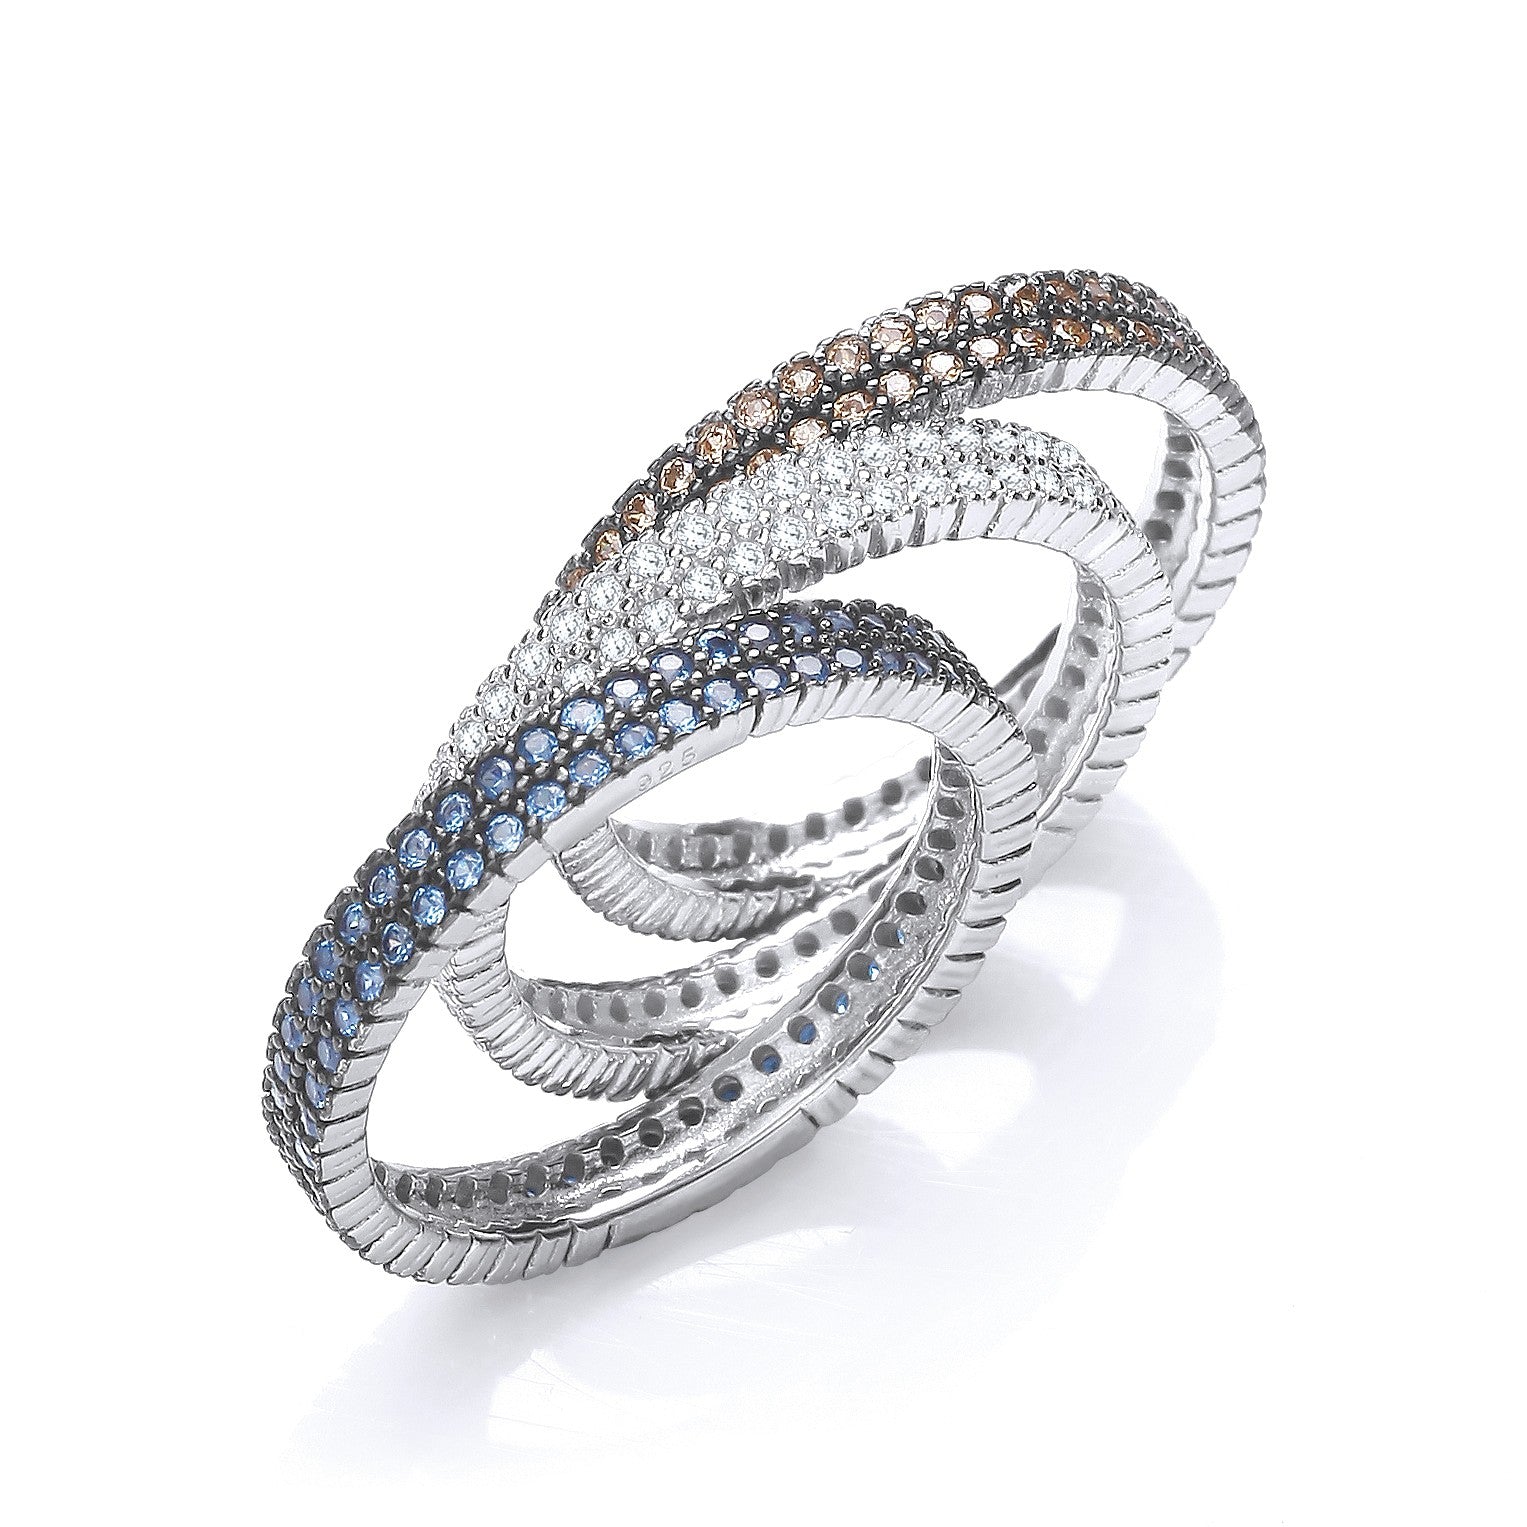 Micro Pave' 3 Band Ring (White, Sapphire & Champagne)